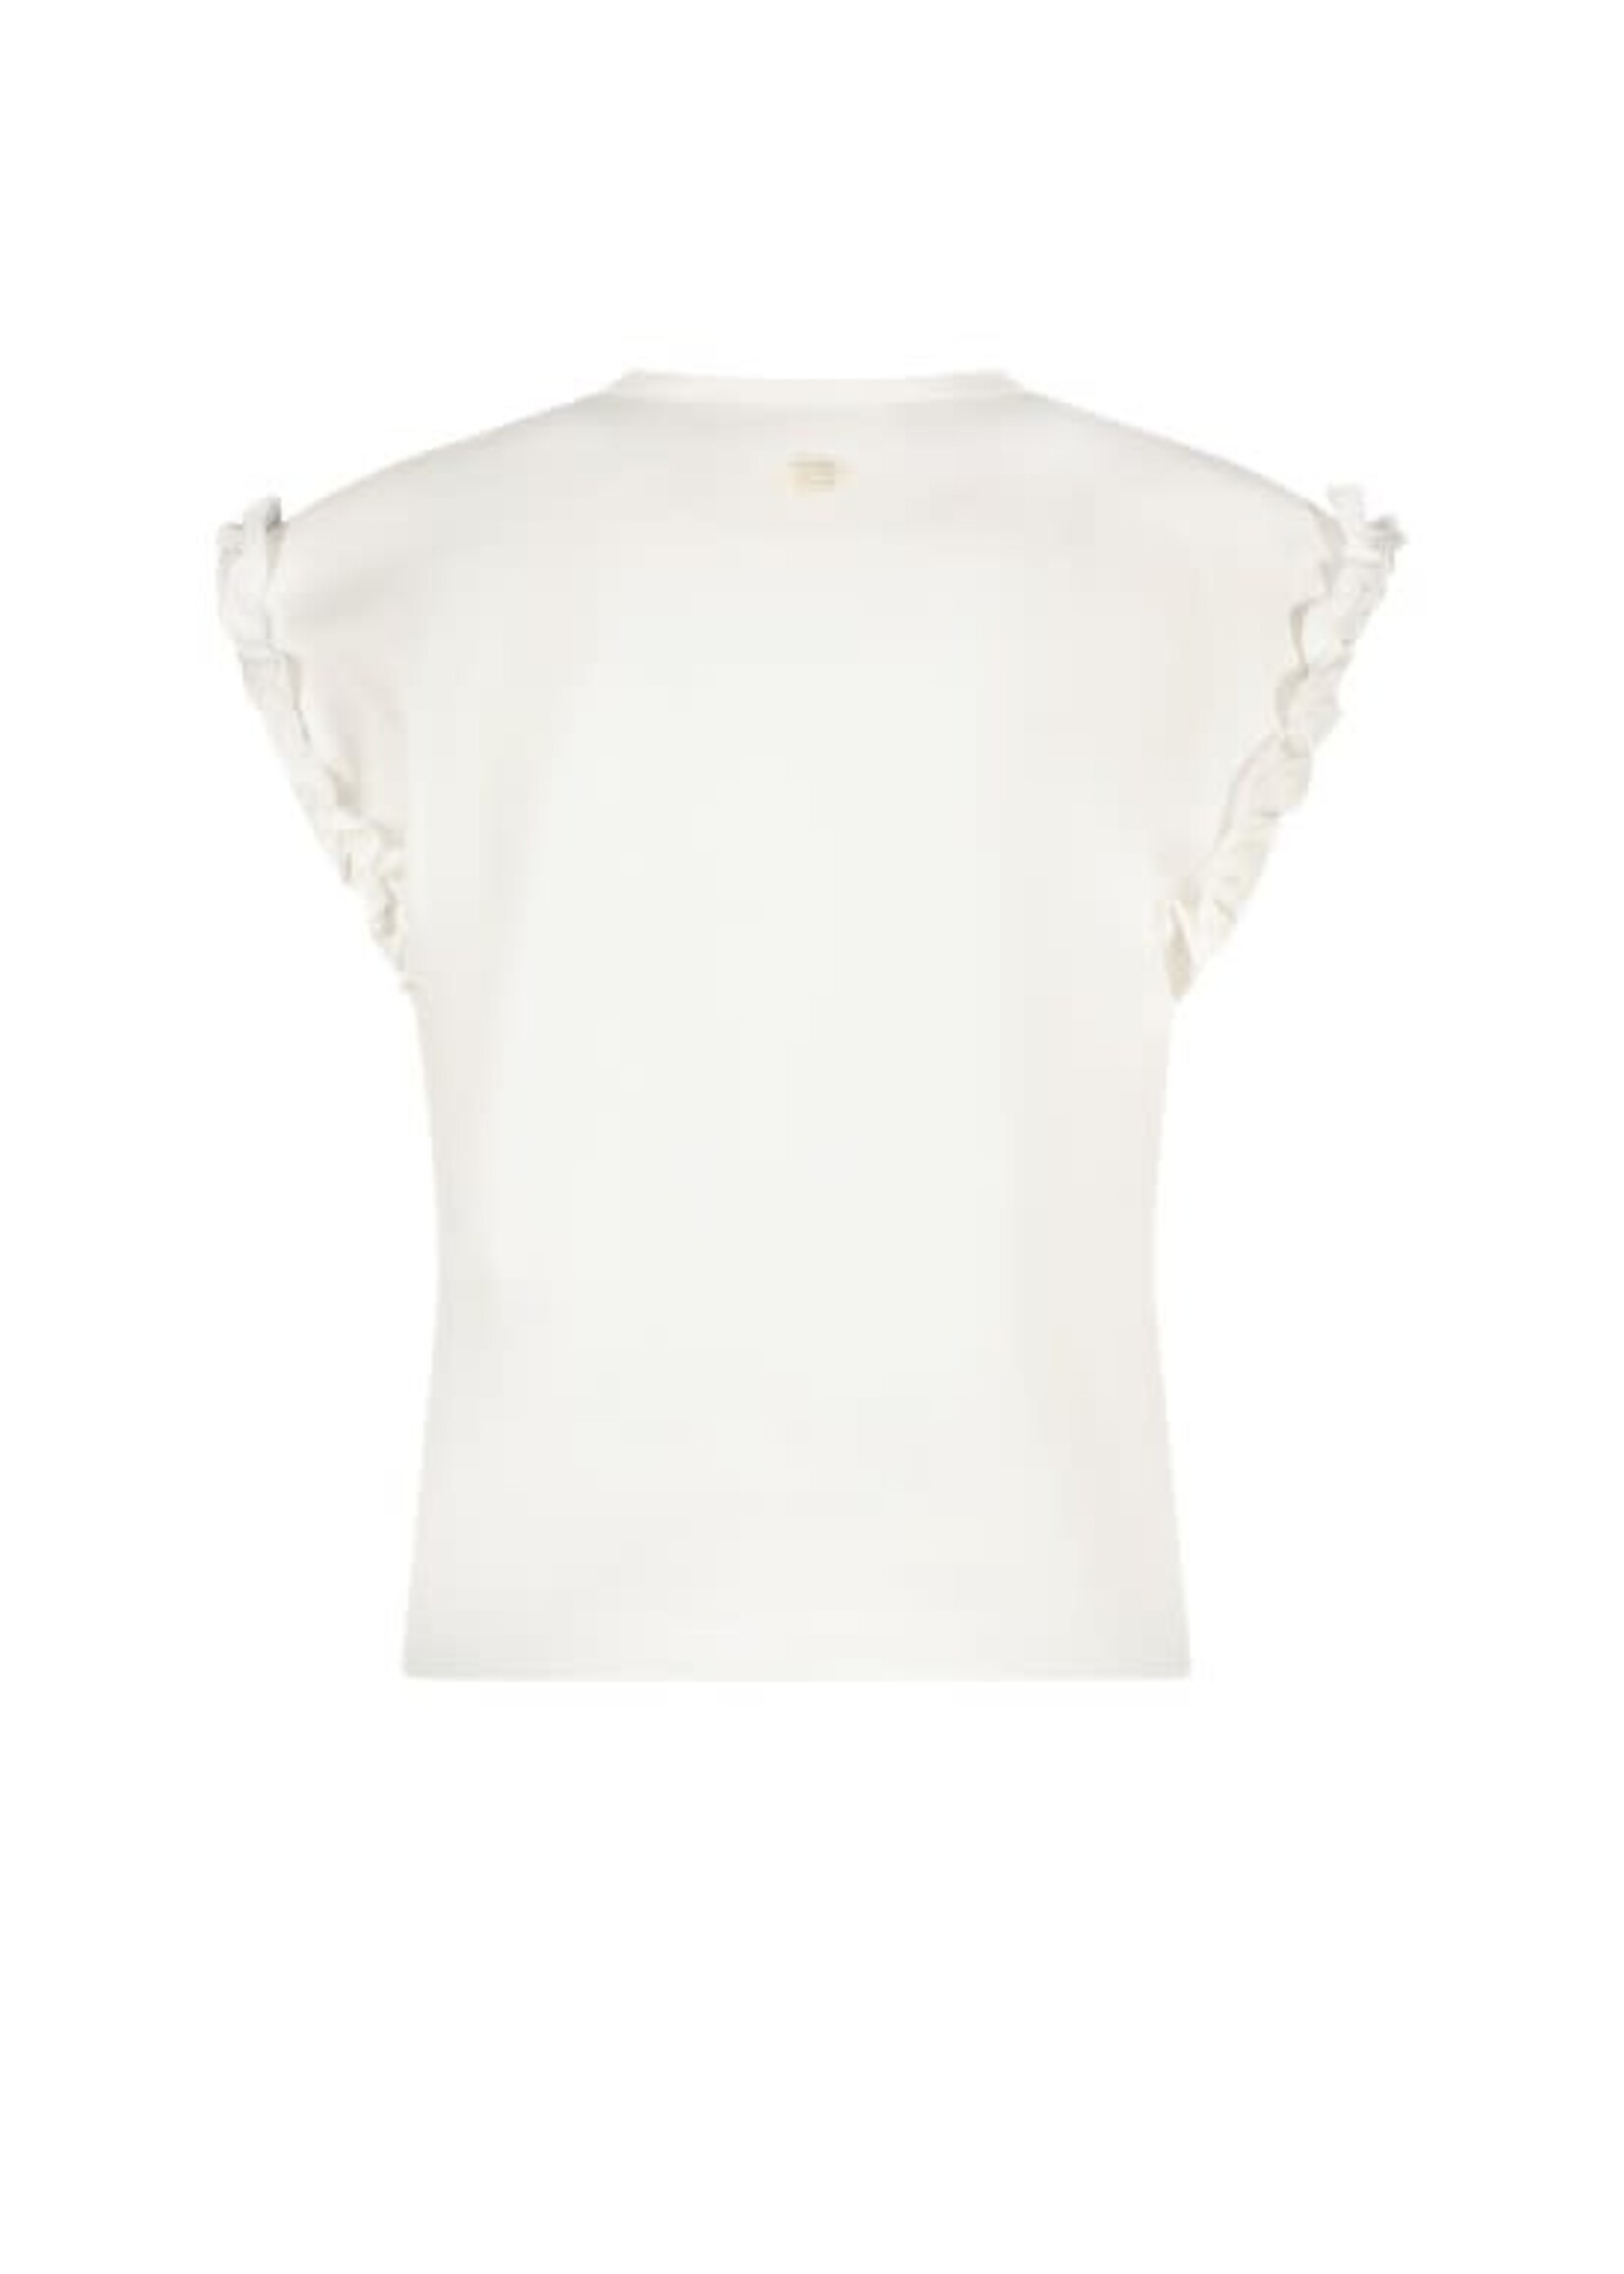 Le Chic Le Chic NOPALY flowers & lines T-shirt C312-5404 Off White